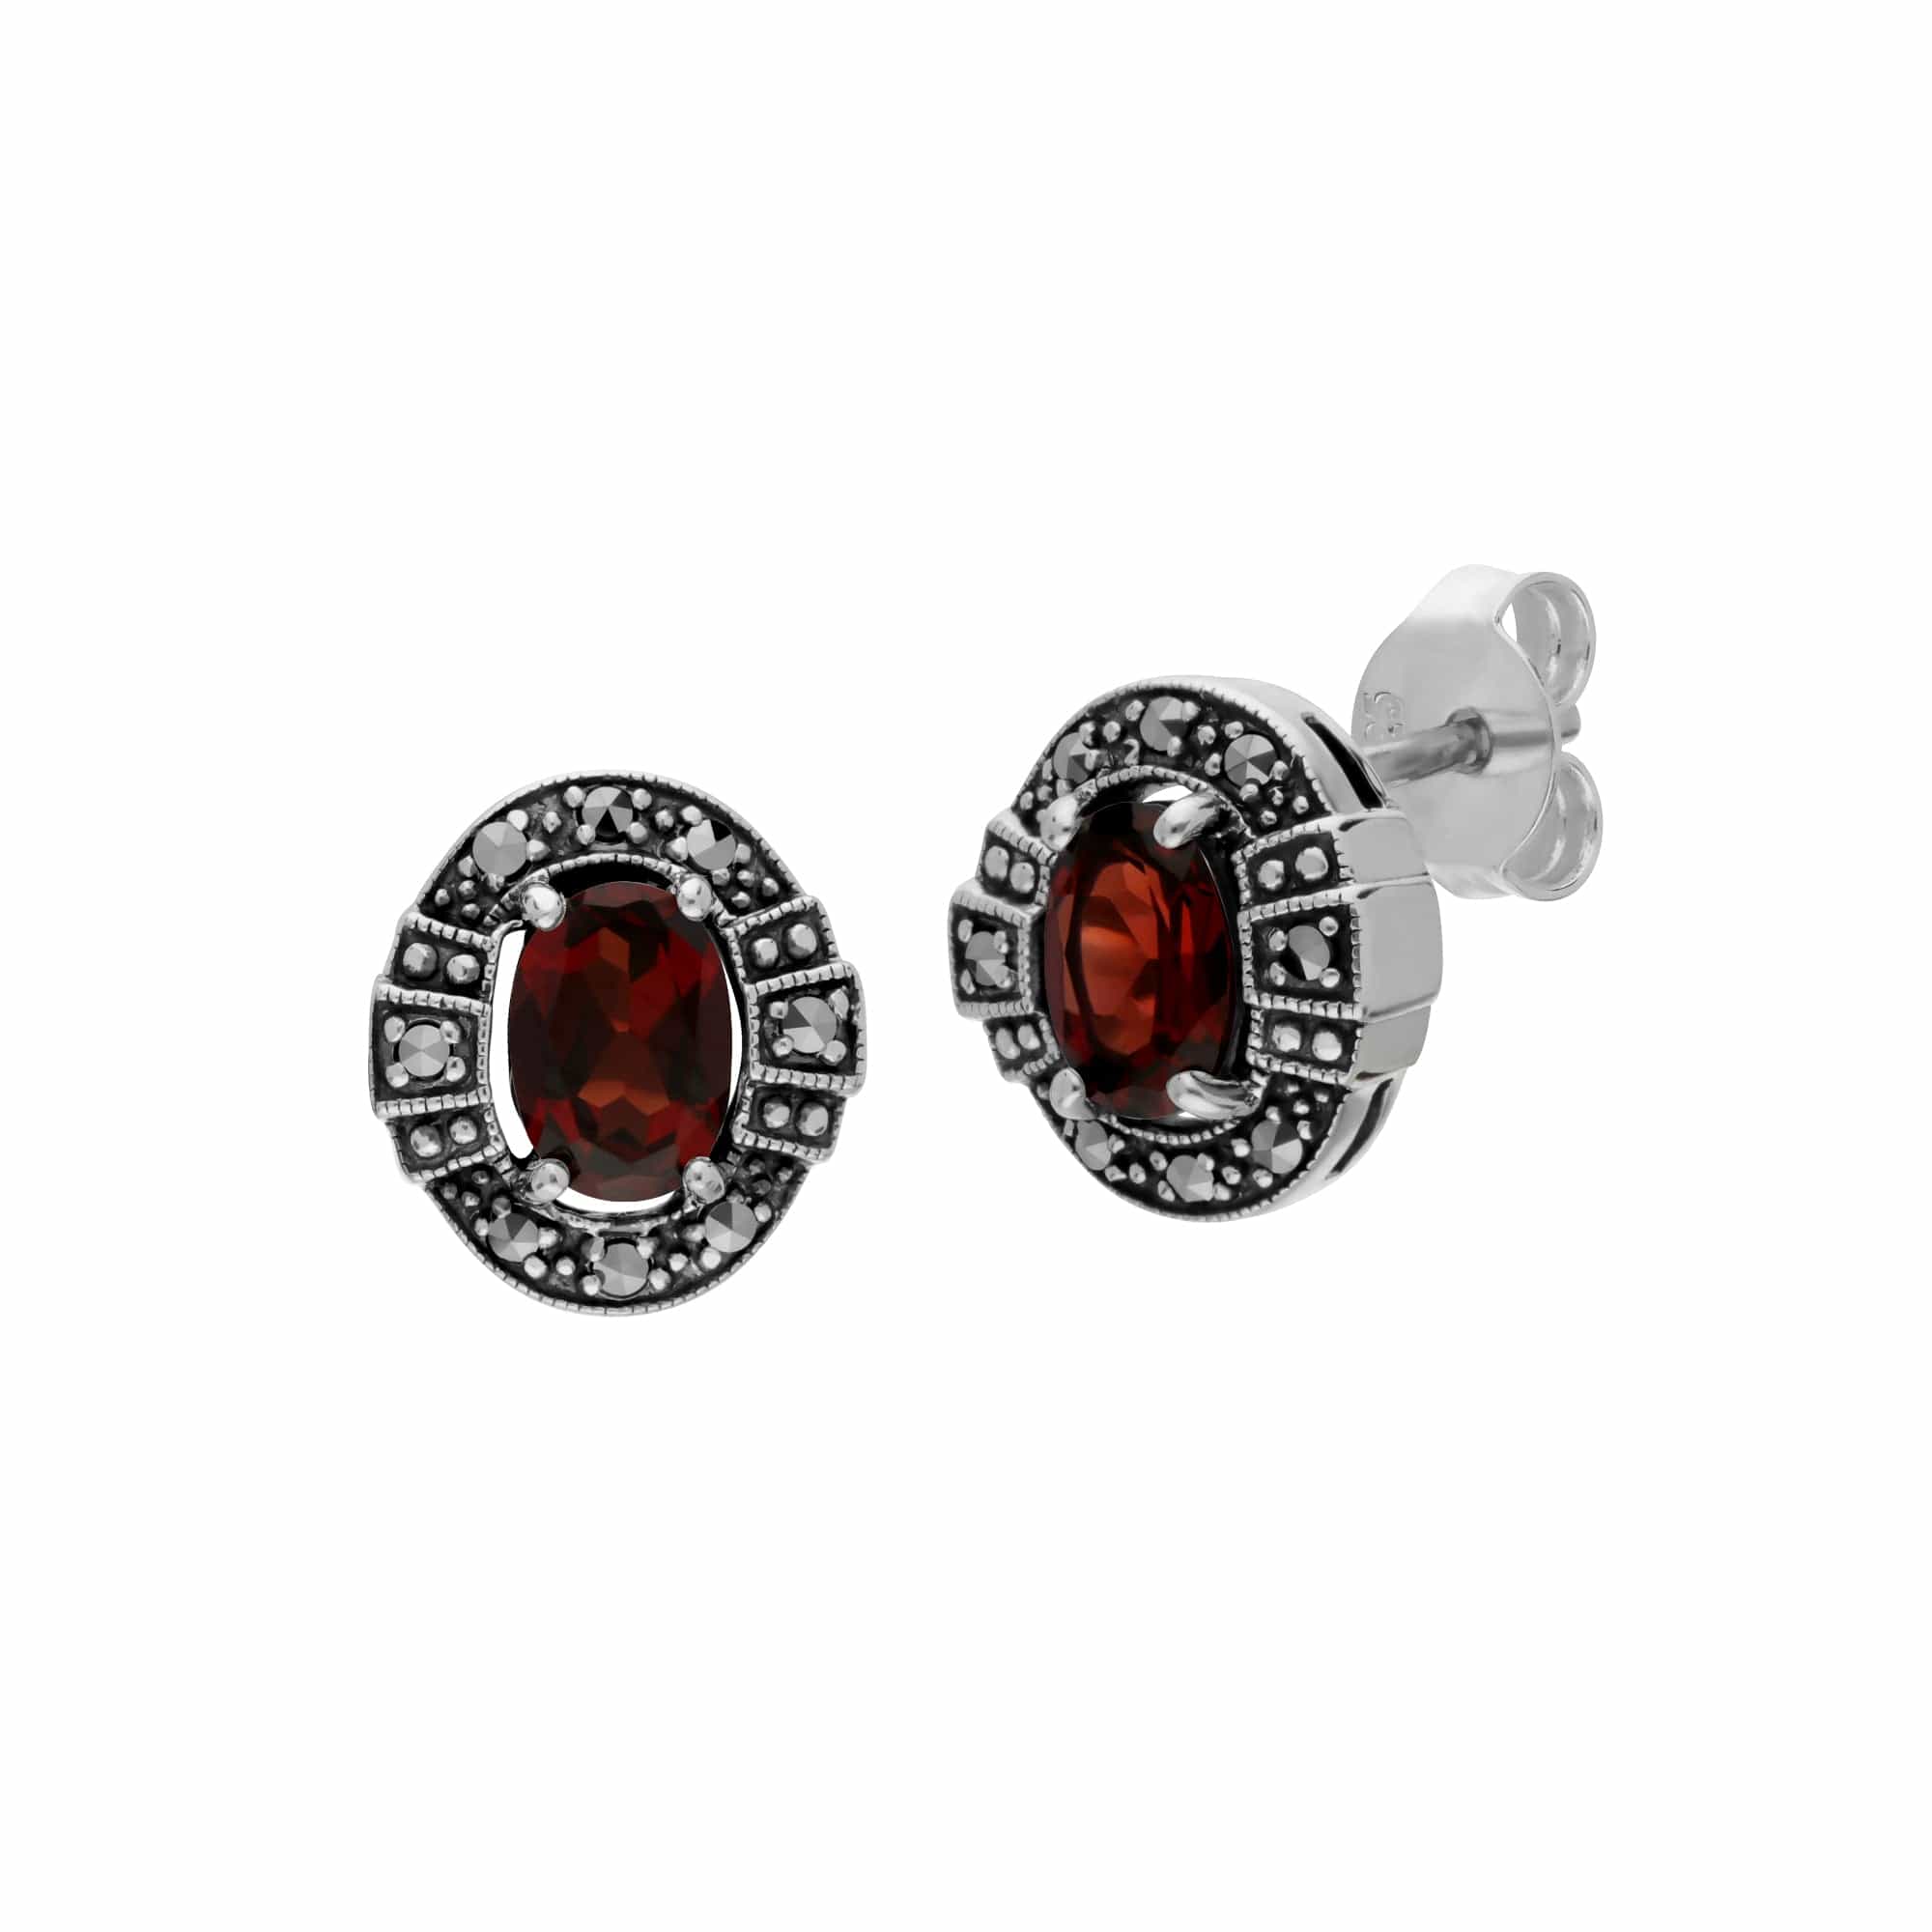 214E873003925-214P303303925 Art Deco Style Oval Garnet and Marcasite Cluster Stud Earrings & Pendant Set in 925 Sterling Silver 2